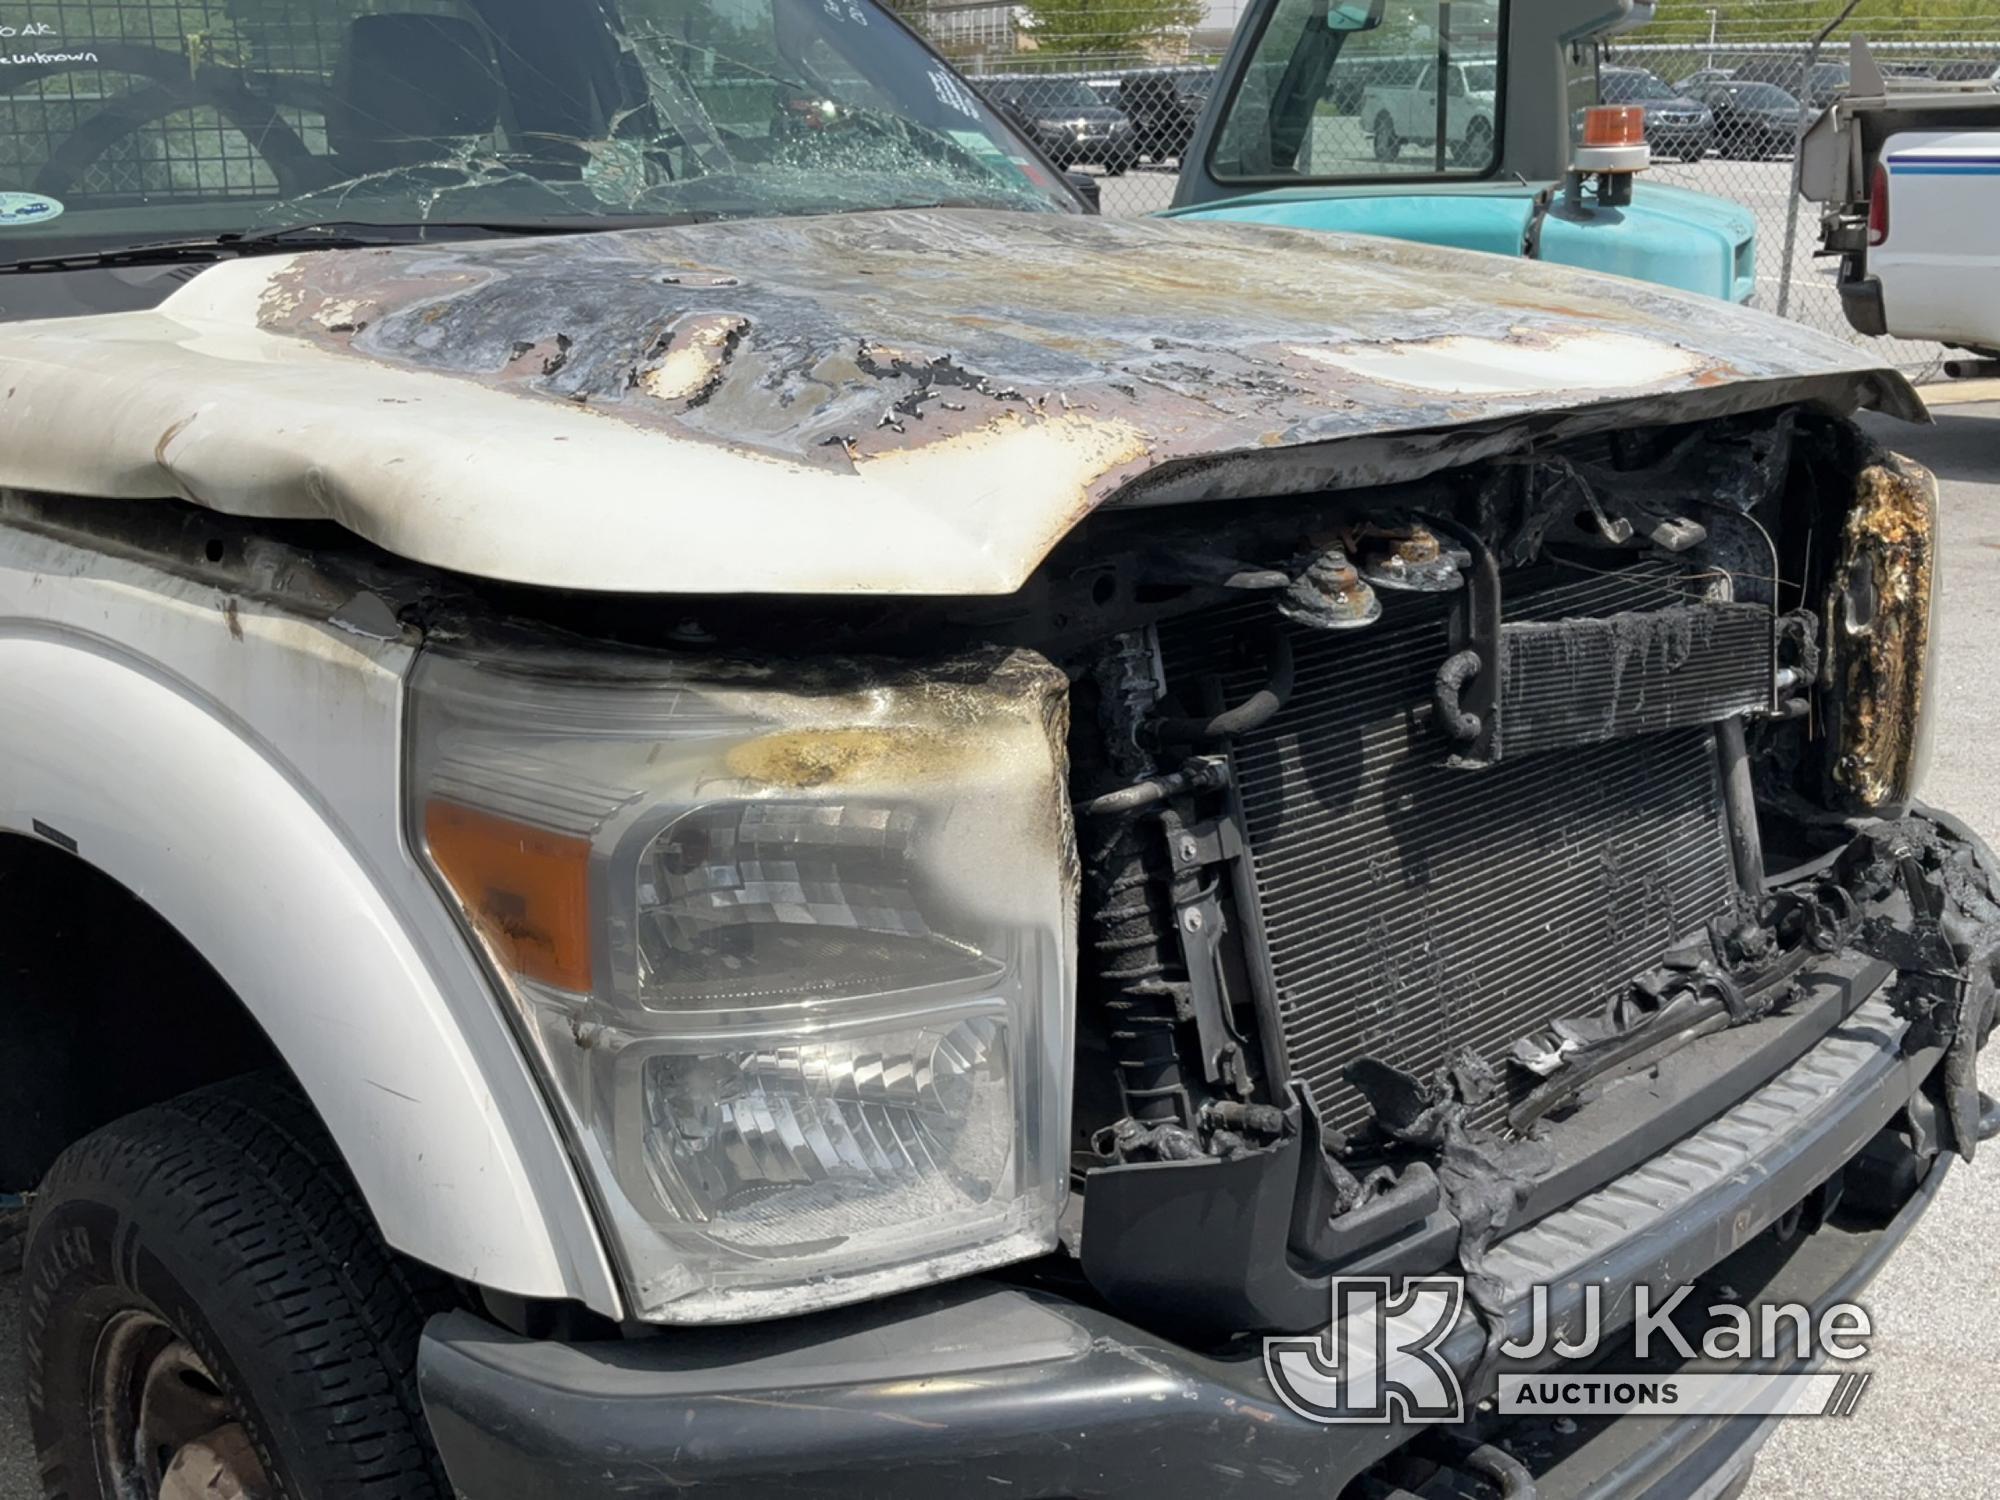 (Chester Springs, PA) 2016 Ford F250 4x4 Pickup Truck Fire Damaged, Not Running, Condition Unknown,